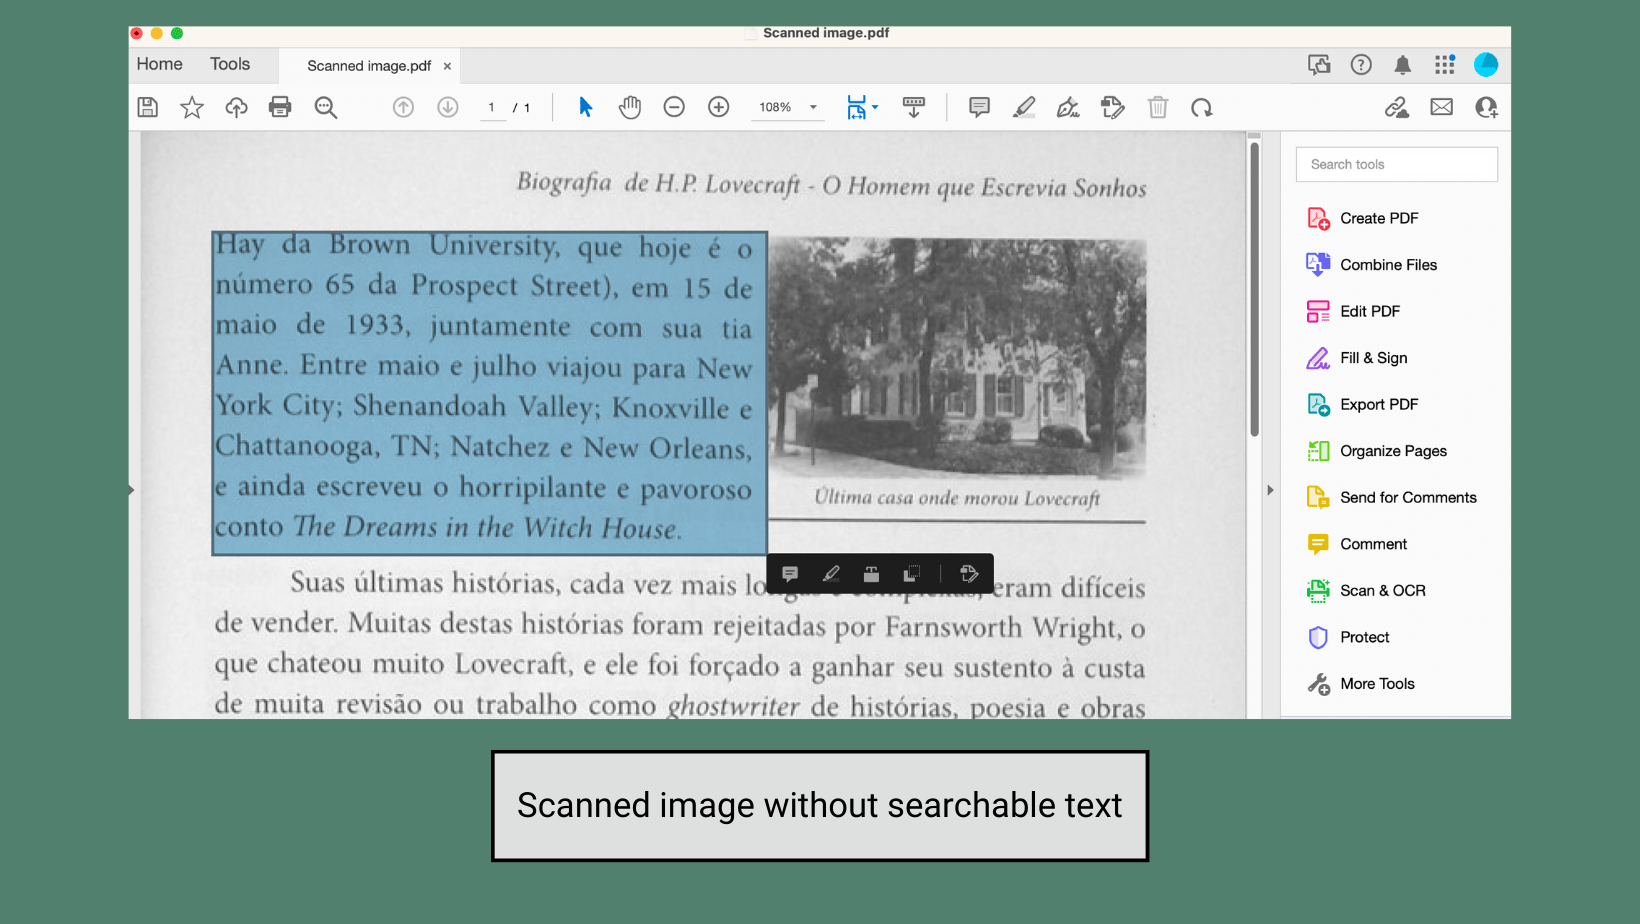 Screenshot of a scanned image of a book page in Adobe Acrobat. A solid blue box overlays a paragraph of text in the image, indicating that each word in the book is not scannable. Below the image, there is a text box that reads “Scanned image without a searchable text.” 